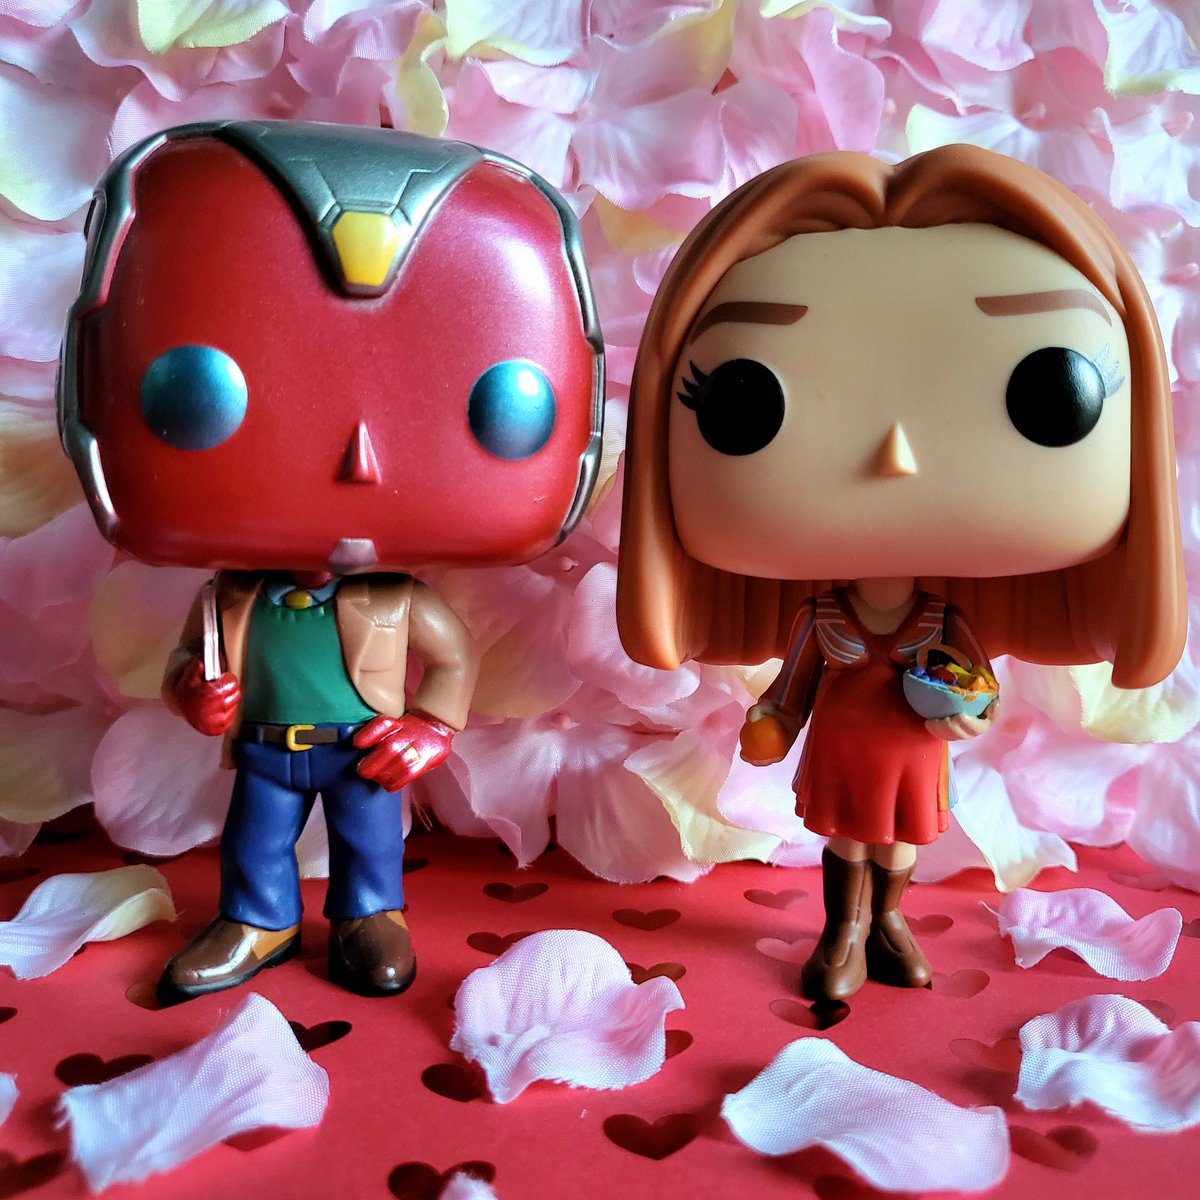 2/13: Sweethearts A bitter sweet love story, but one I'm so glad we got to see more of in WandaVision @originalfunko #FunkoPhotoADayChallenge